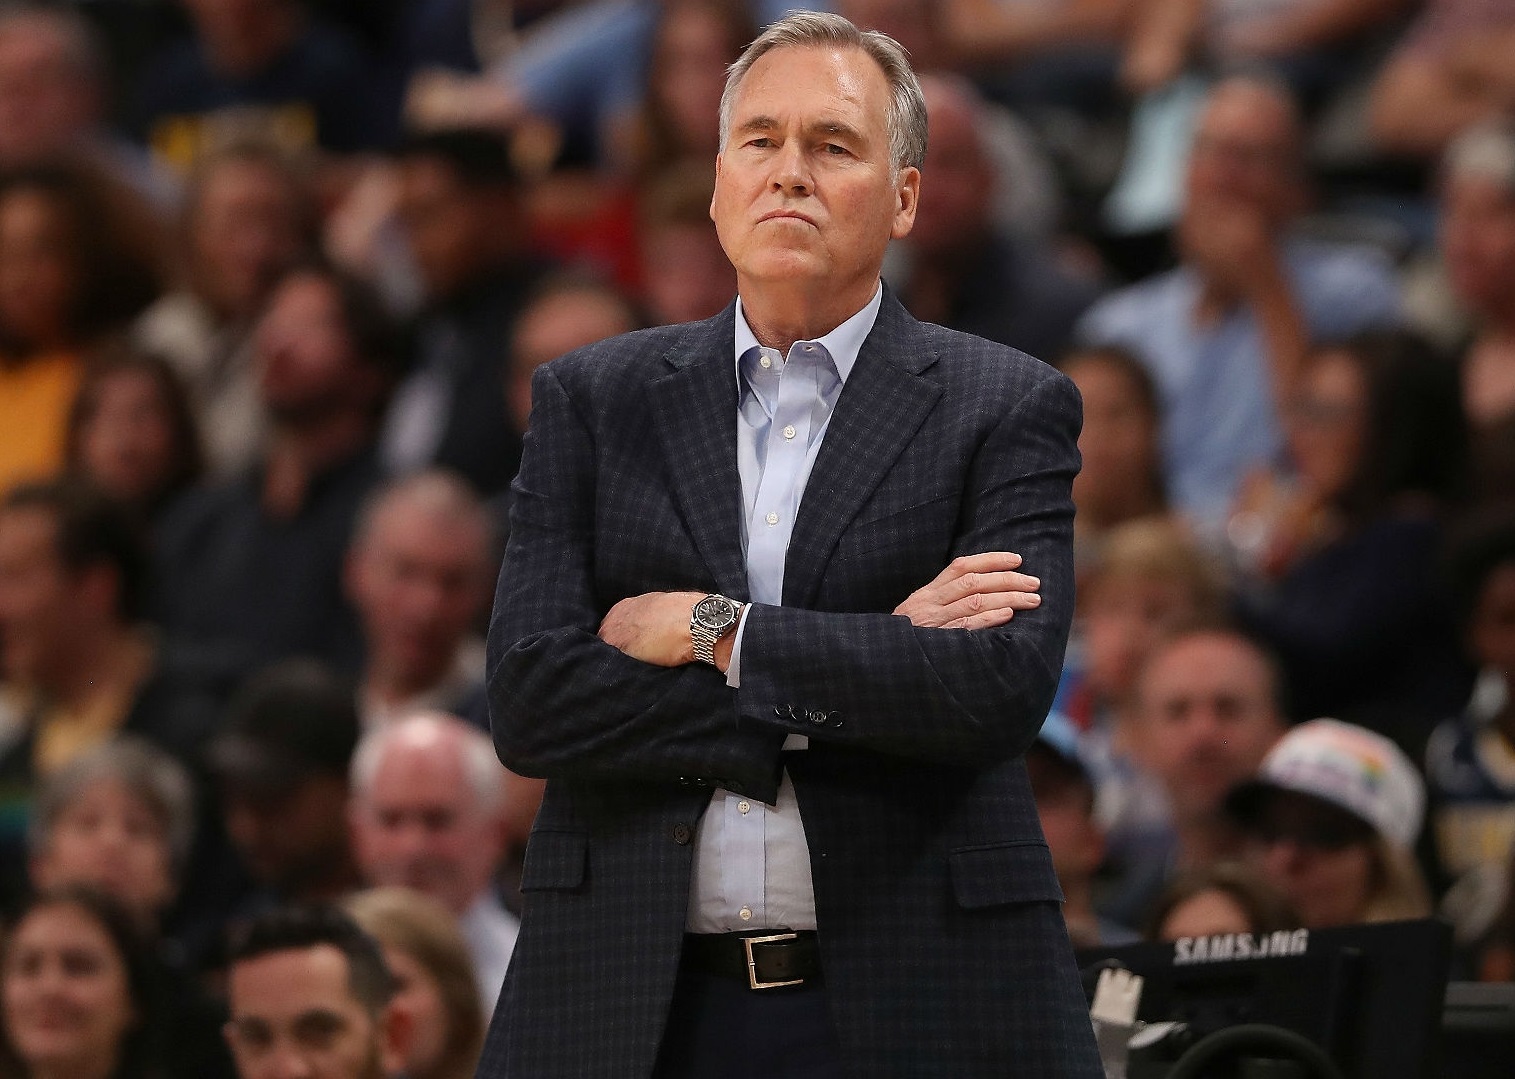 Houston could be in “Big Trouble”, says Coach D’Antoni